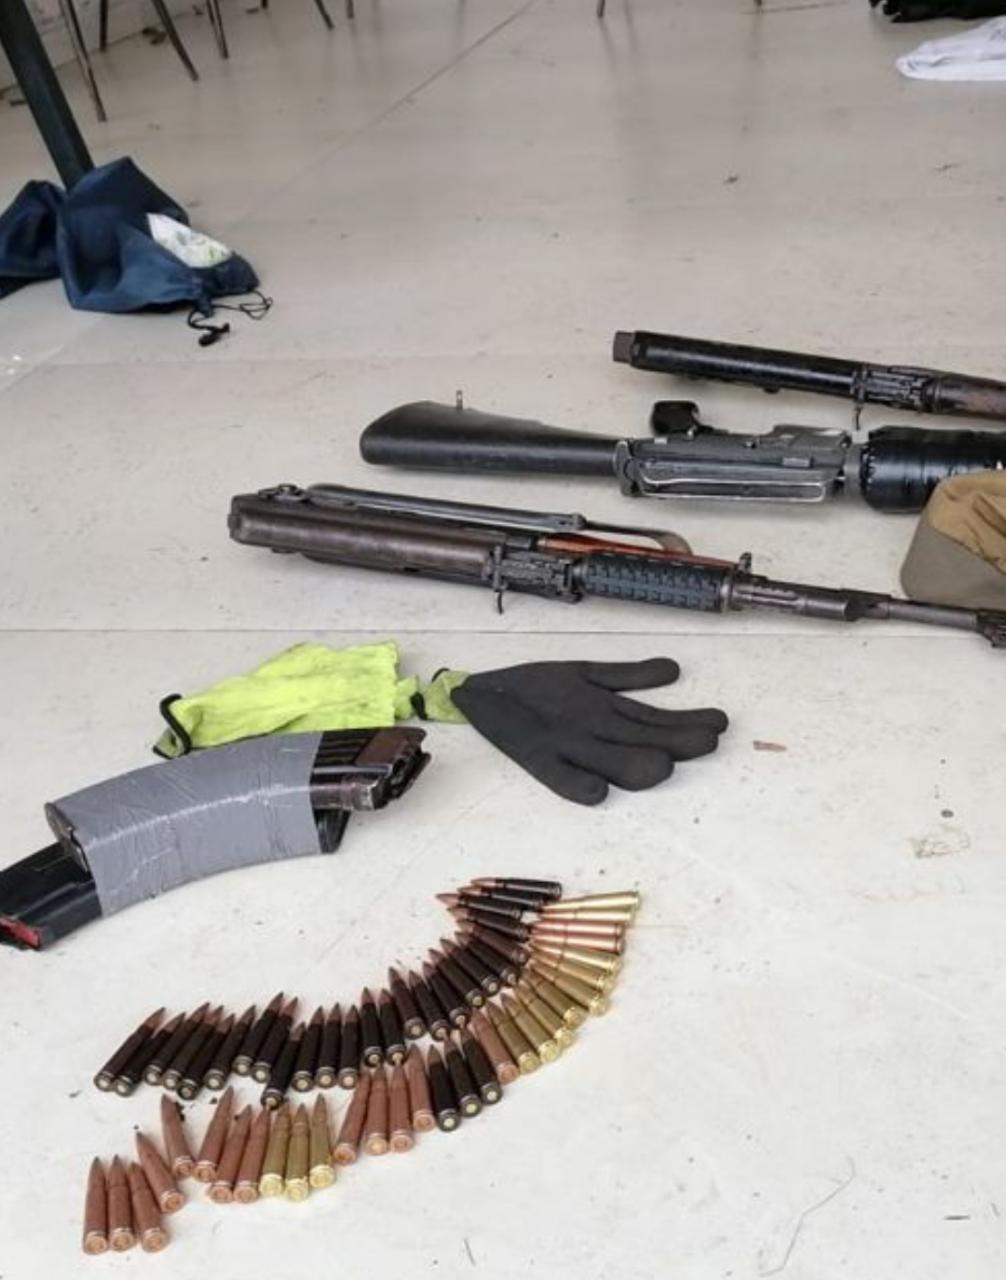 Police recover five guns and ammunition at Lombardy East house